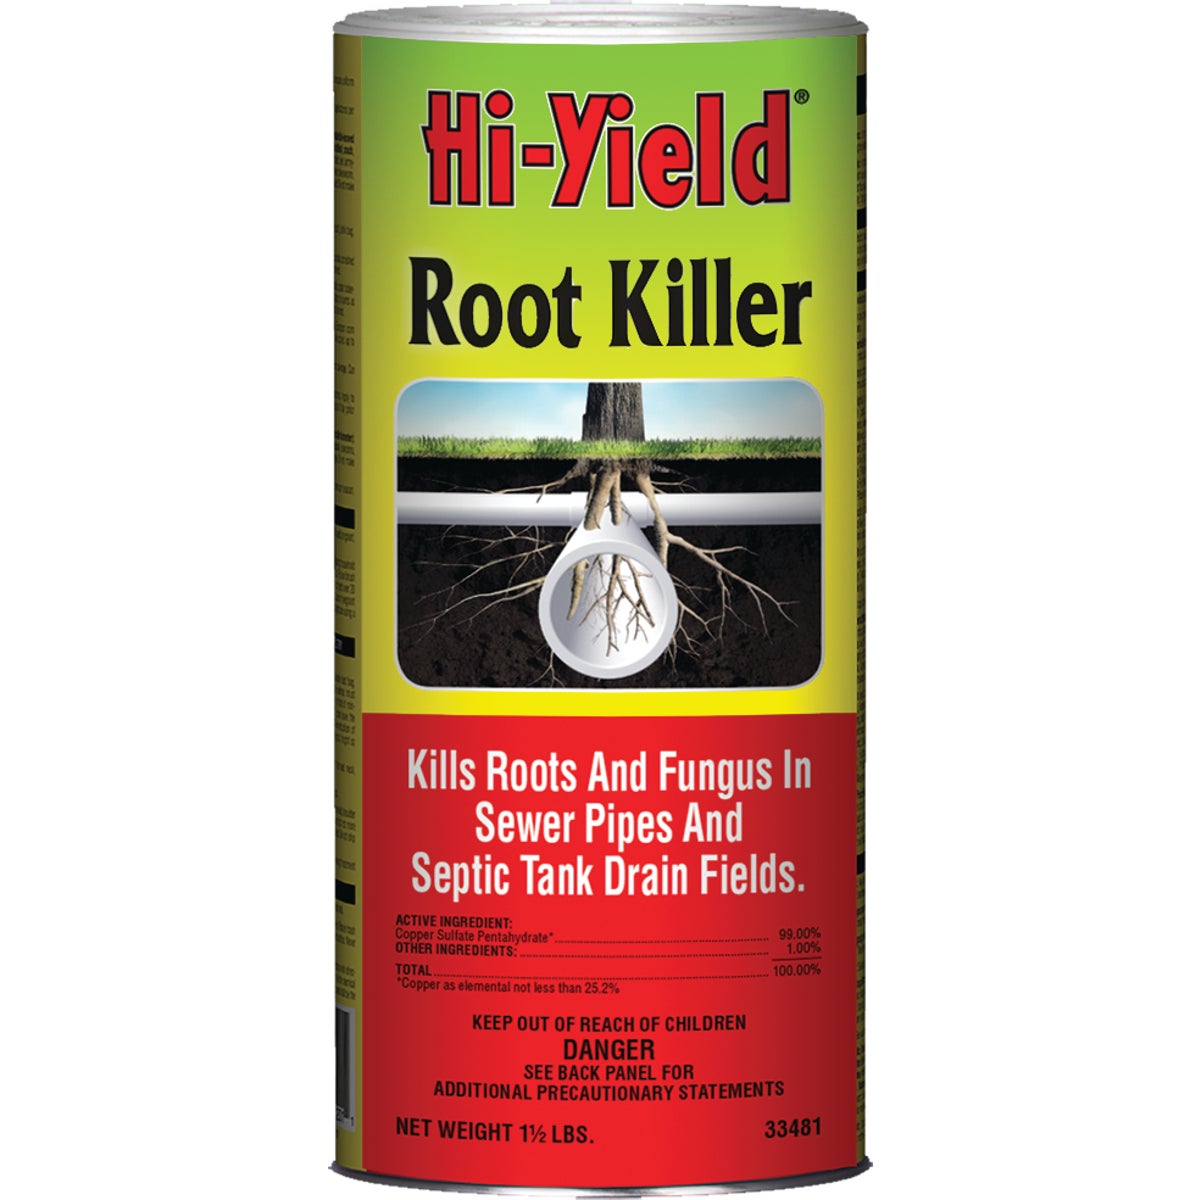 Item 700737, Formulated to quickly and economically kill and dissolve fungus and roots 